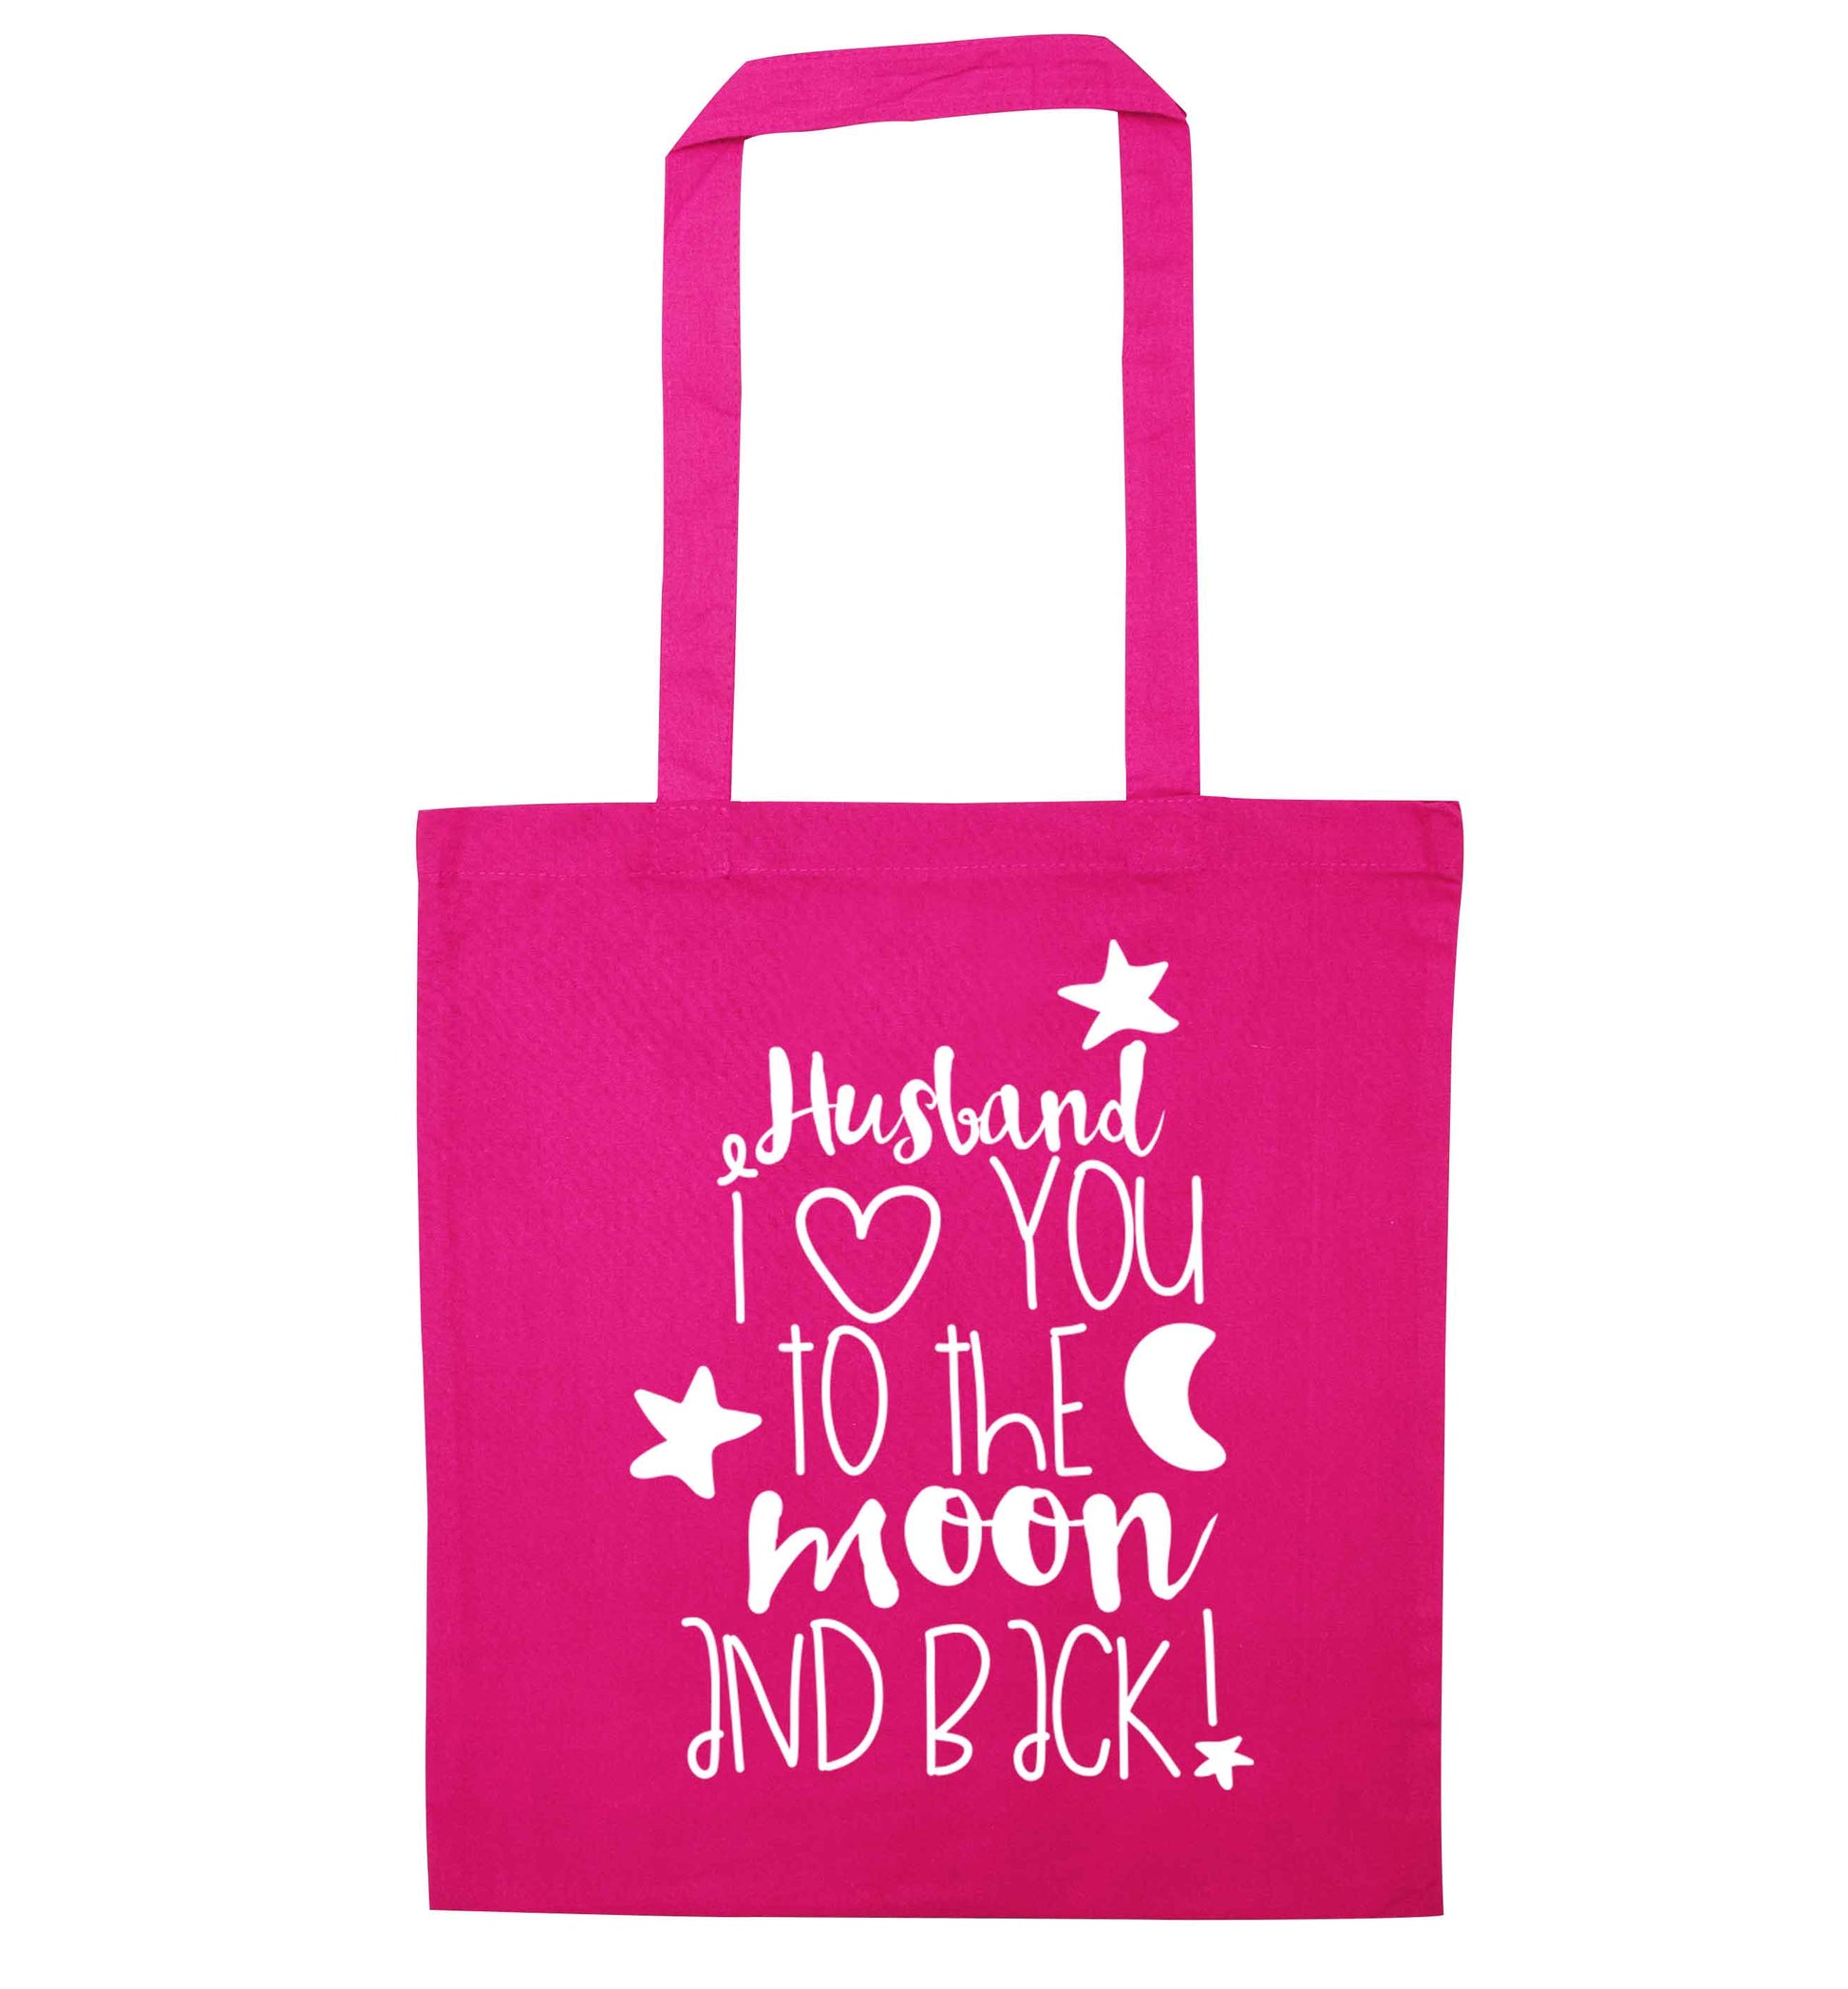 Husband I love you to the moon and back pink tote bag